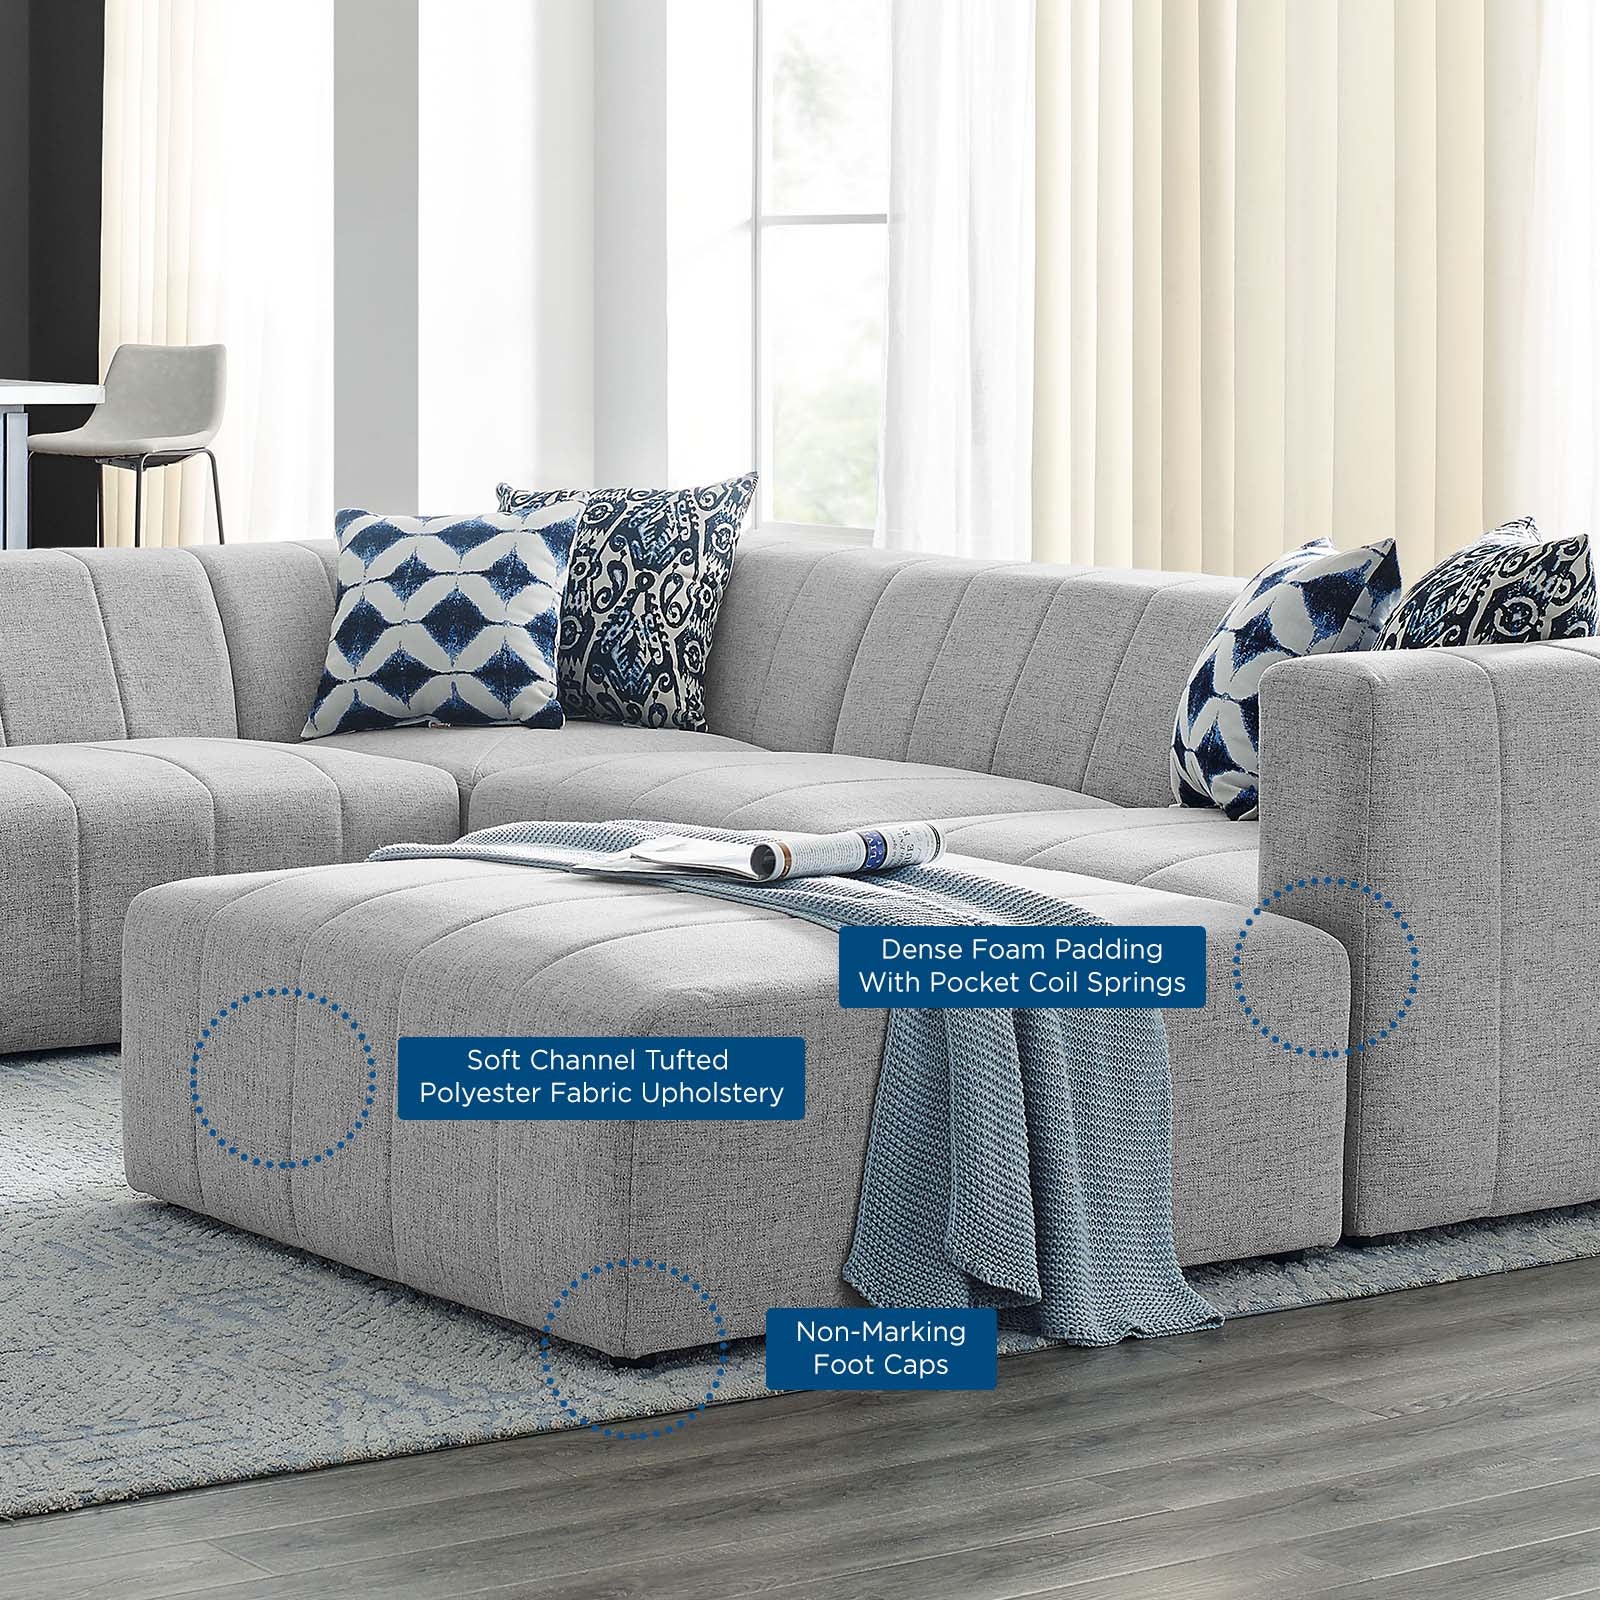 Bartlett Upholstered Fabric Upholstered Fabric 6-Piece Sectional Sofa - East Shore Modern Home Furnishings